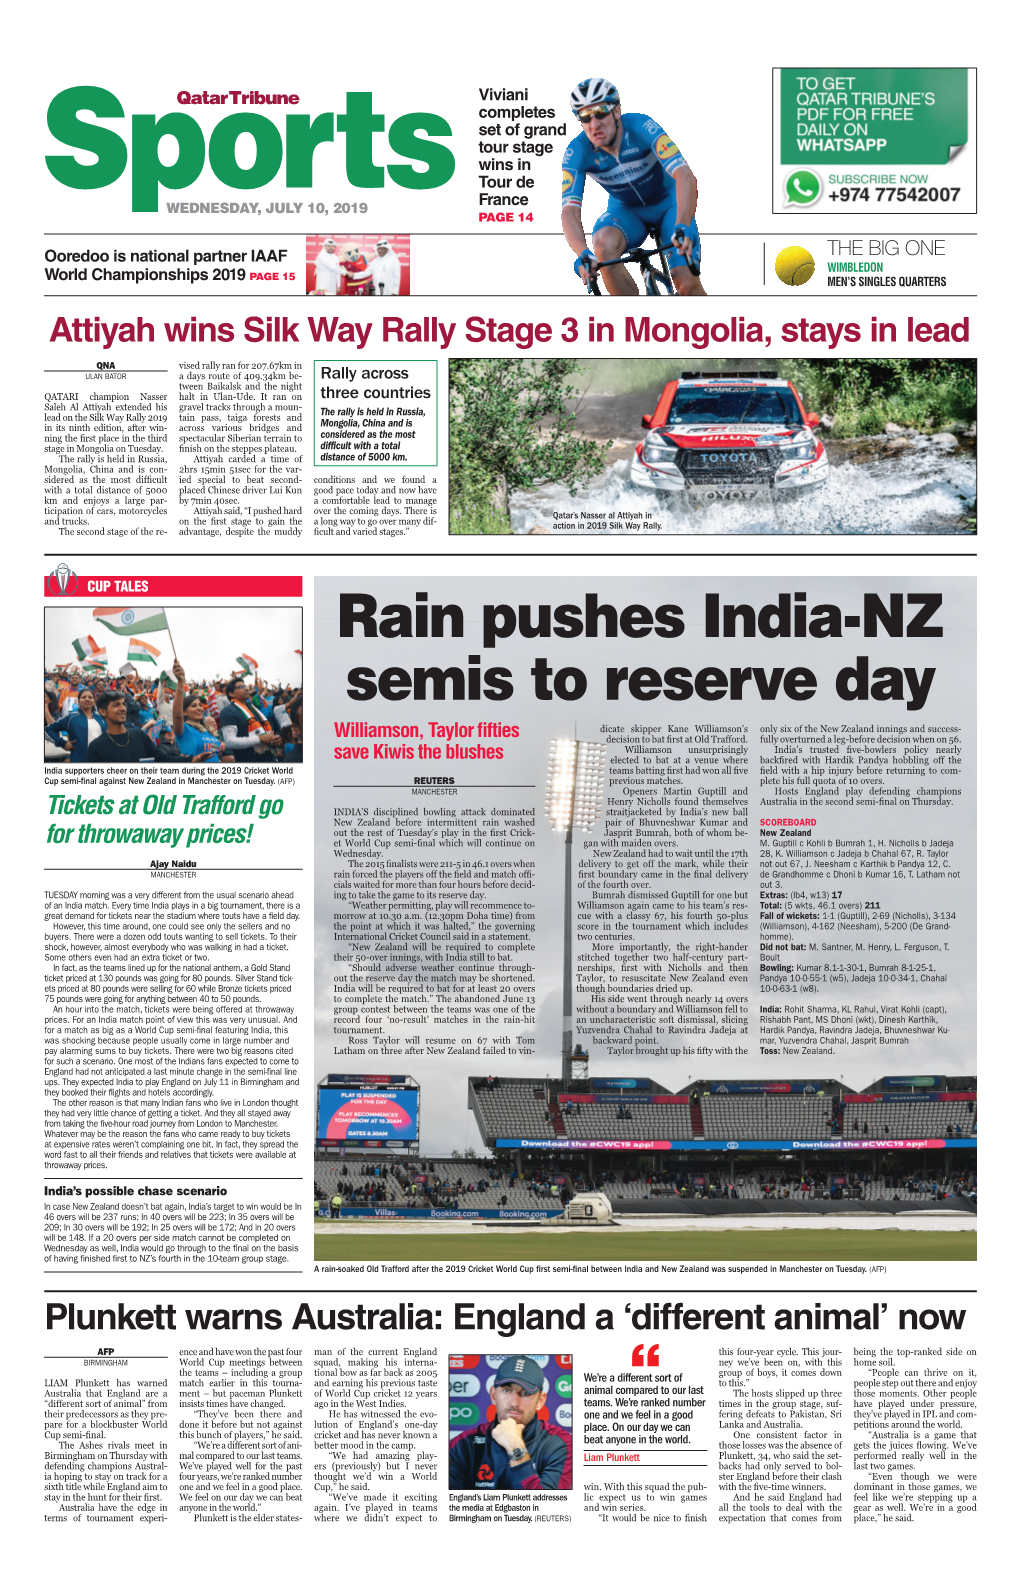 Rain Pushes India-NZ Semis to Reserve Day